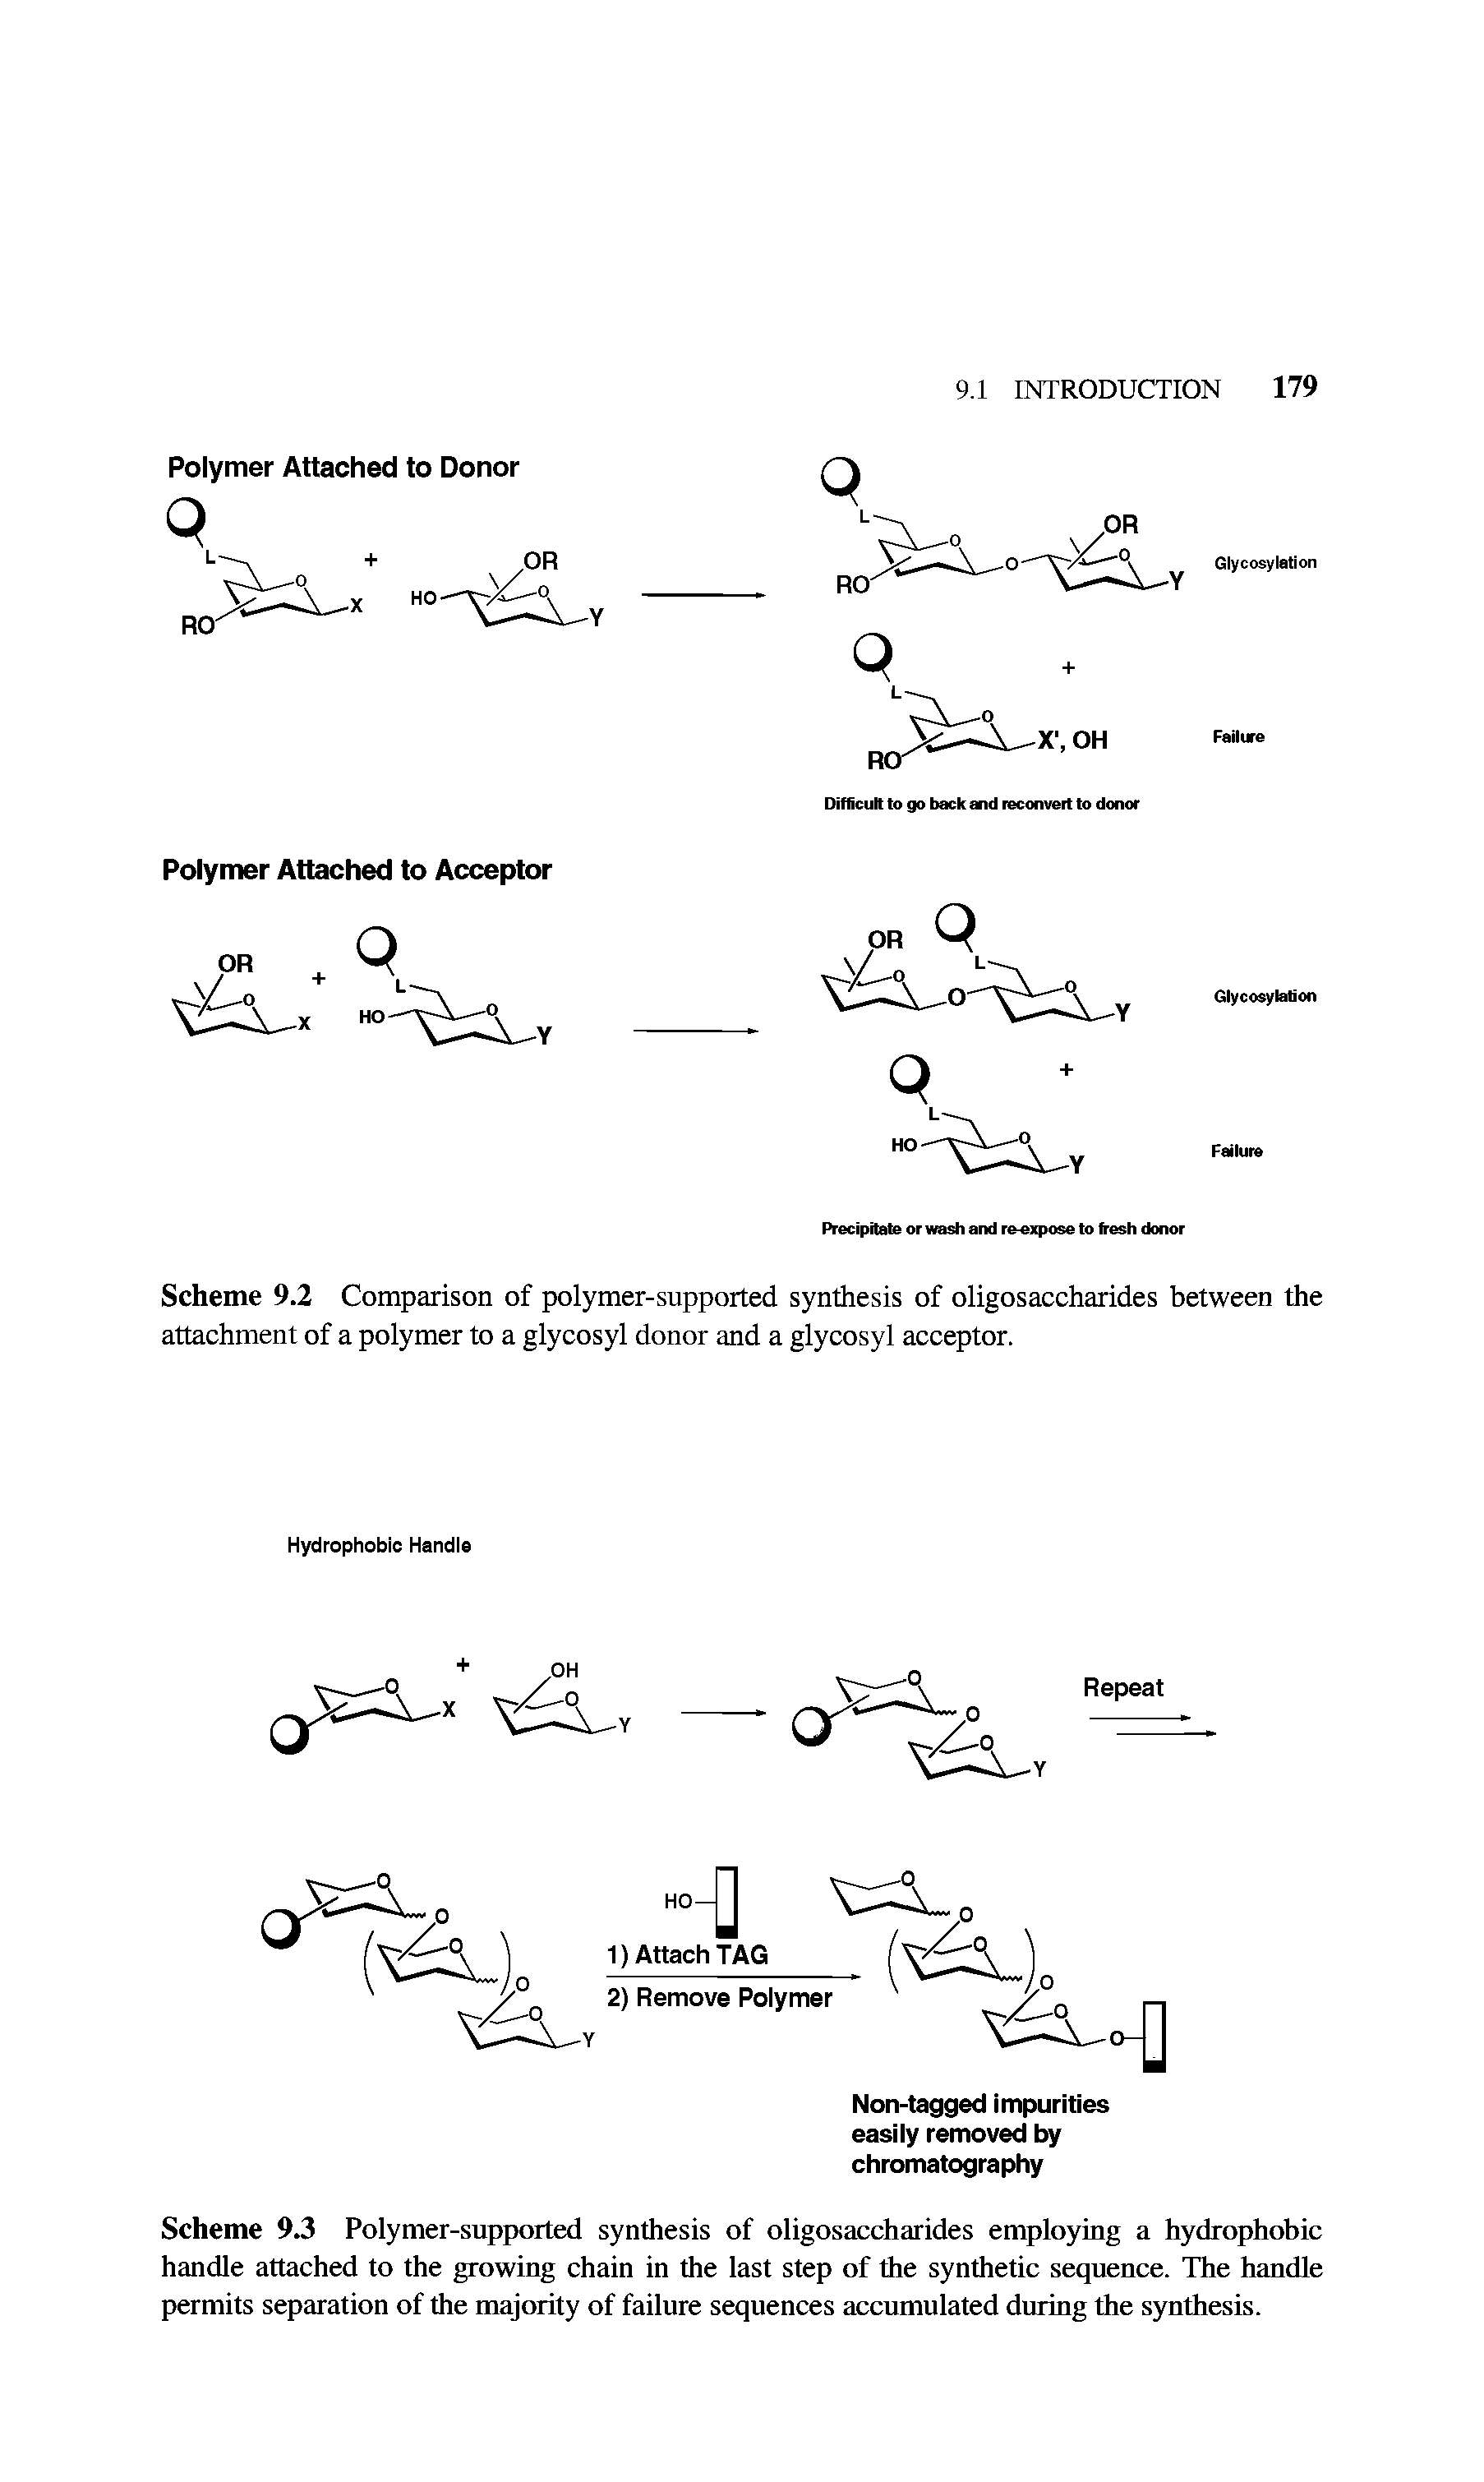 Scheme 9.2 Comparison of polymer-supported synthesis of oligosaccharides between the attachment of a polymer to a glycosyl donor and a glycosyl acceptor.